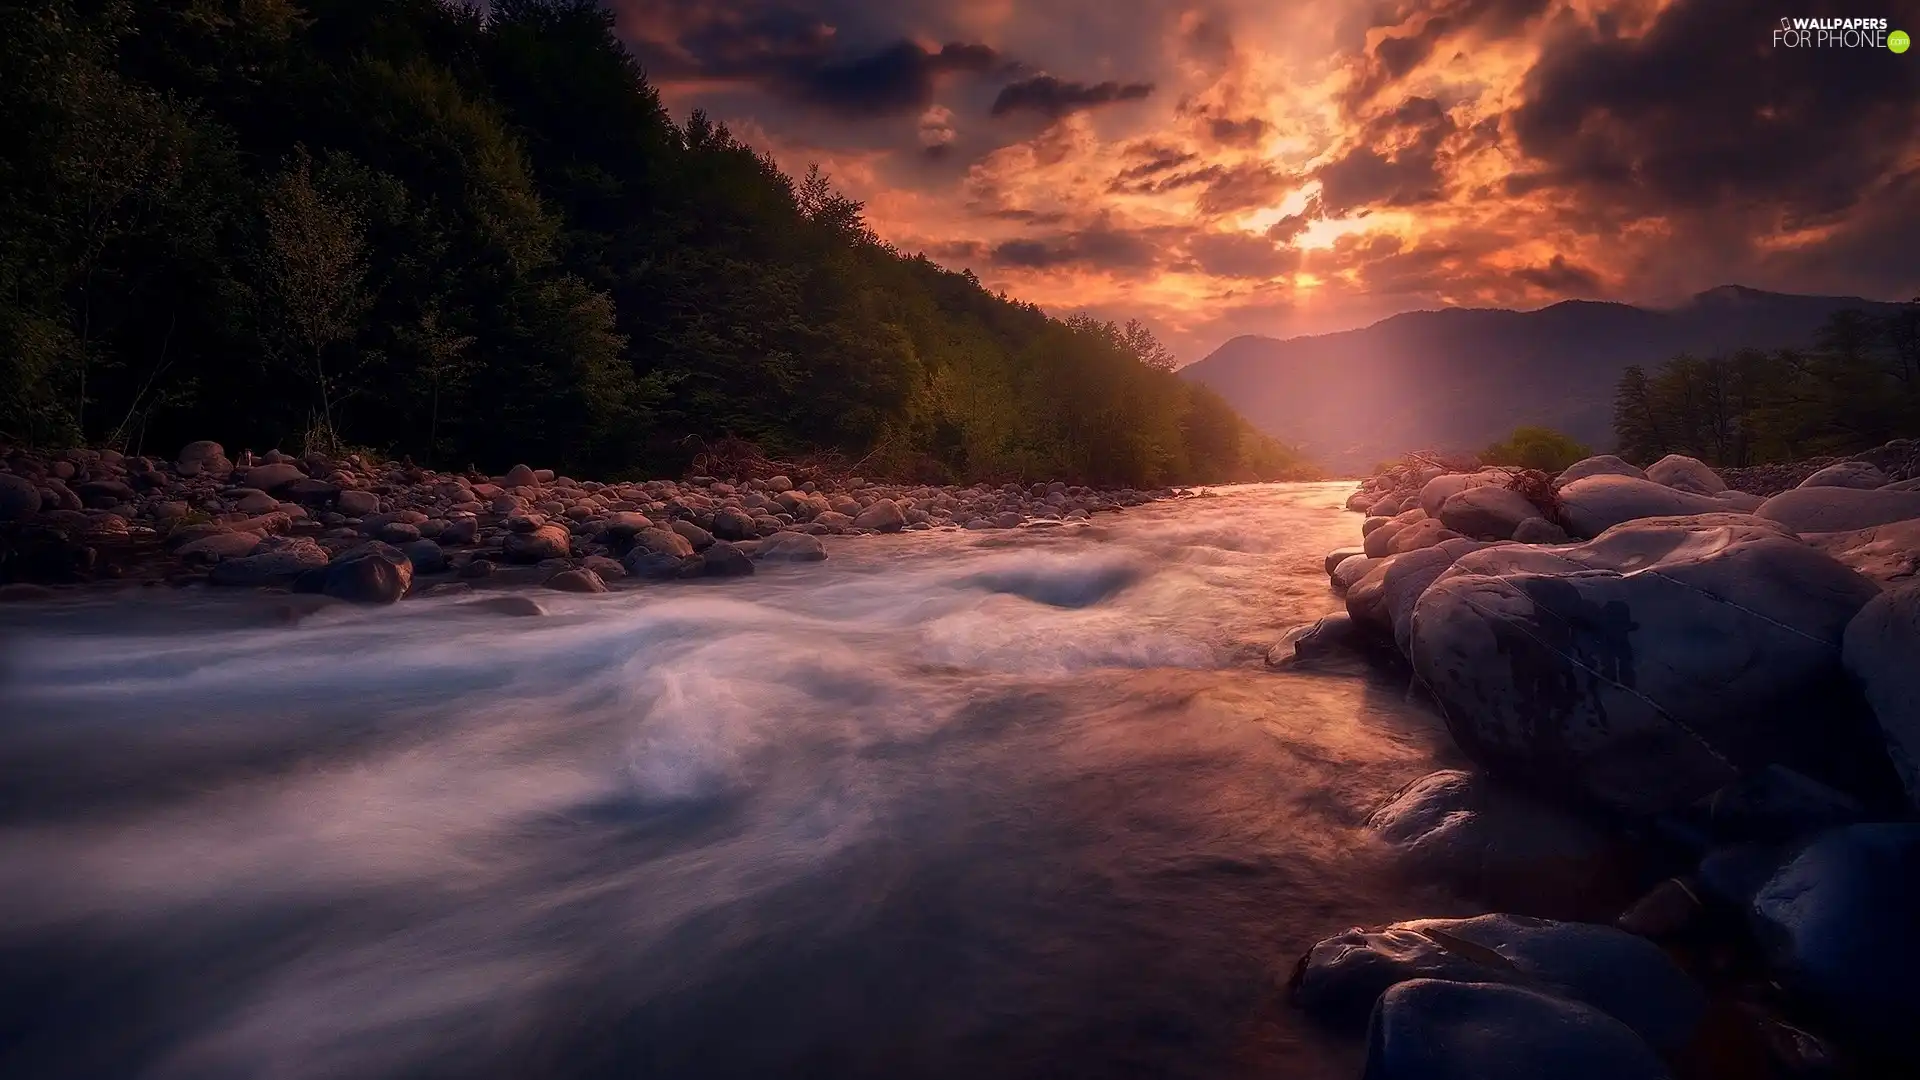 Mountains, River, clouds, Great Sunsets, forest, Stones